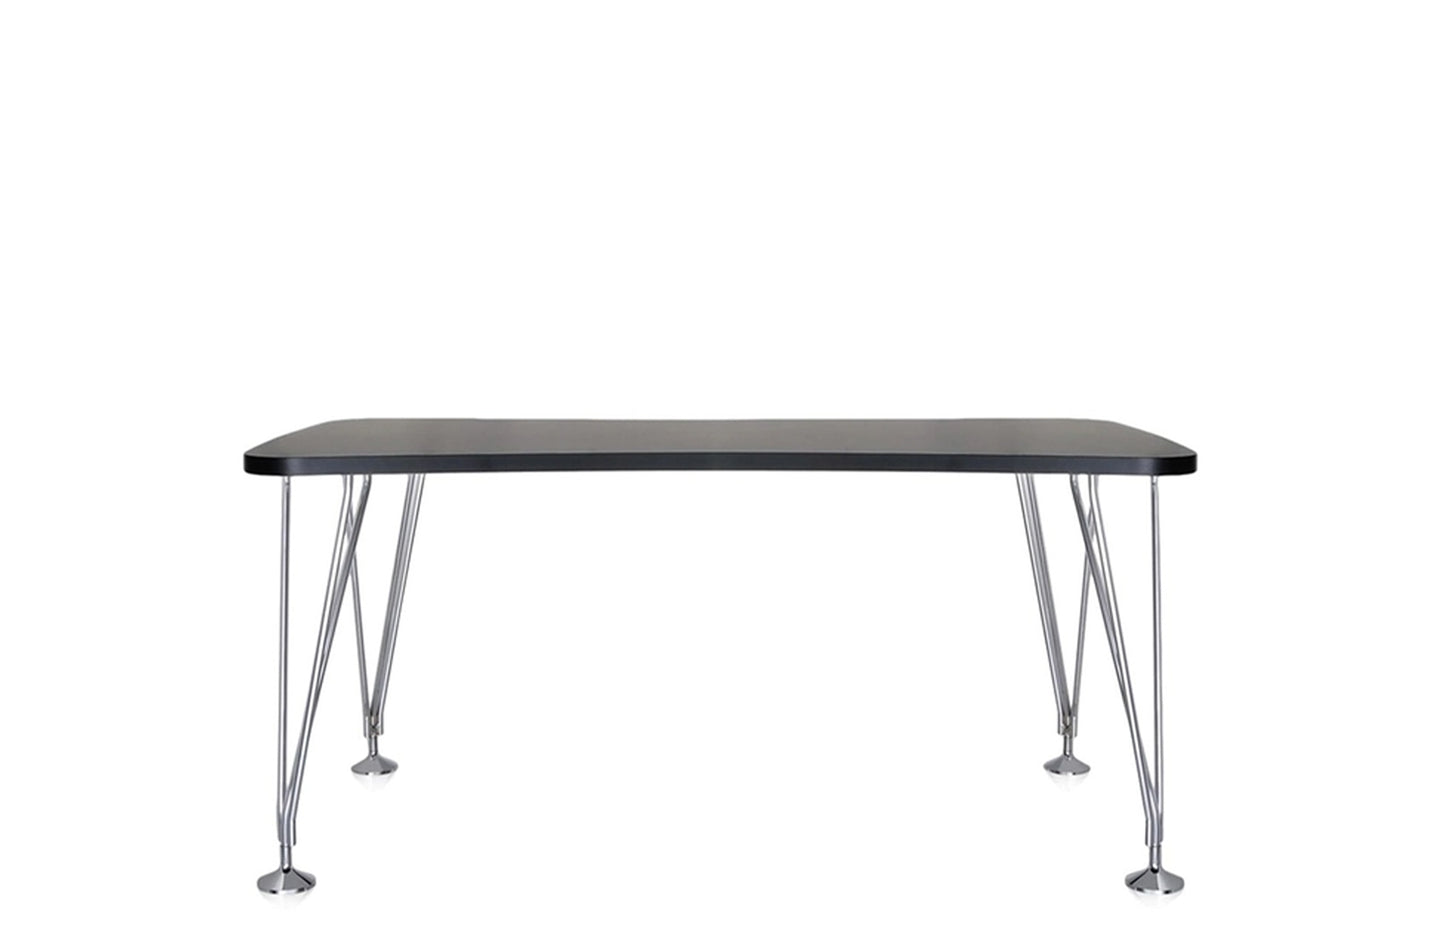 Max Small Table
